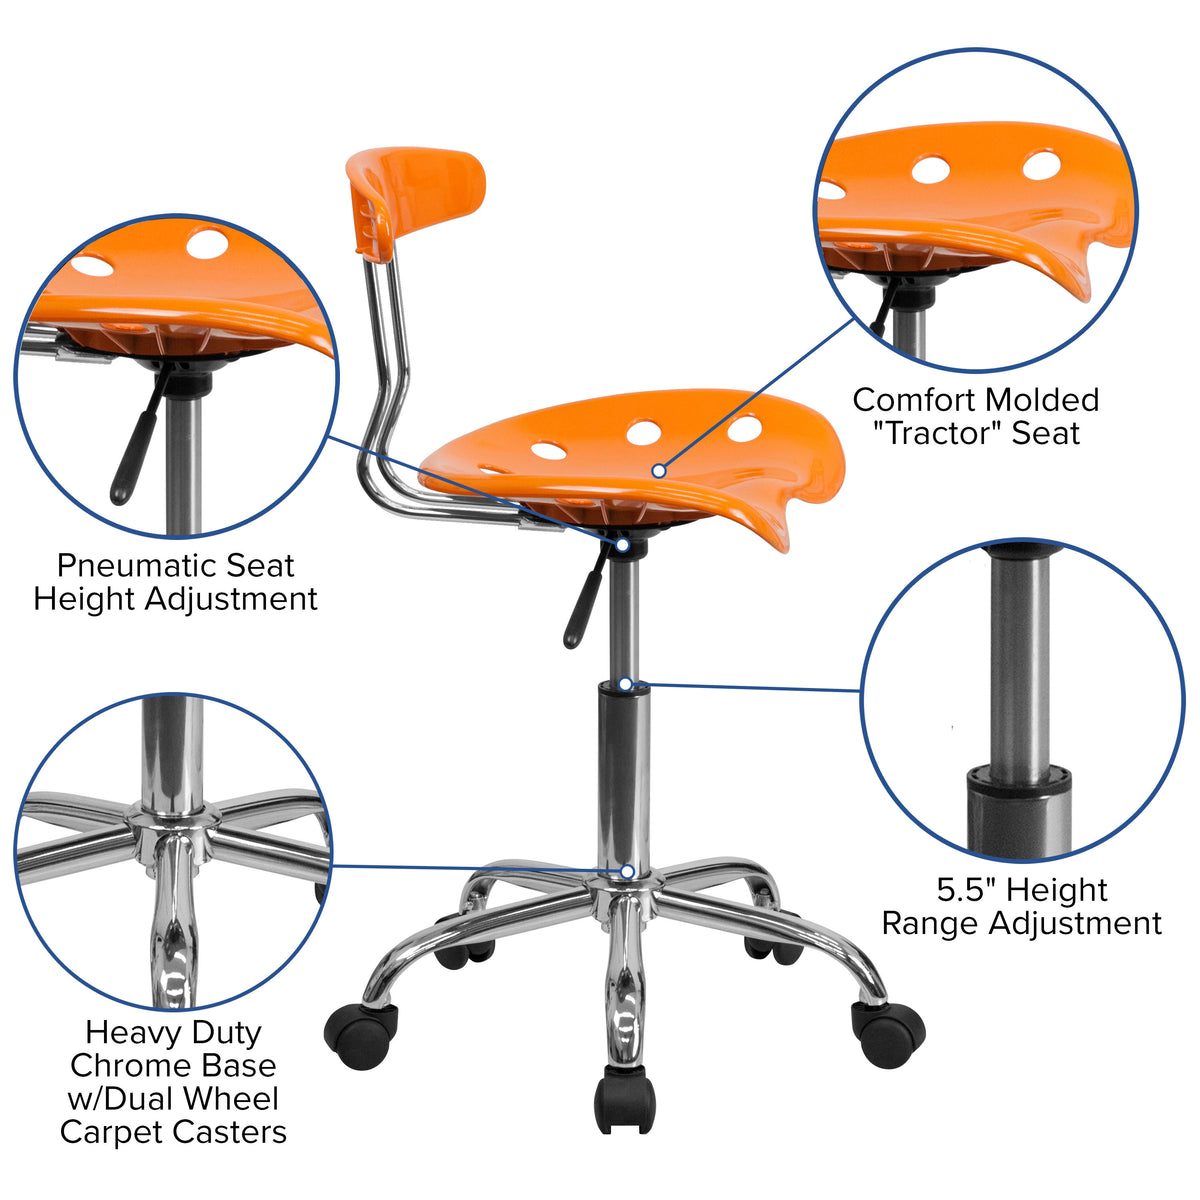 Orange |#| Vibrant Orange and Chrome Swivel Task Office Chair with Tractor Seat